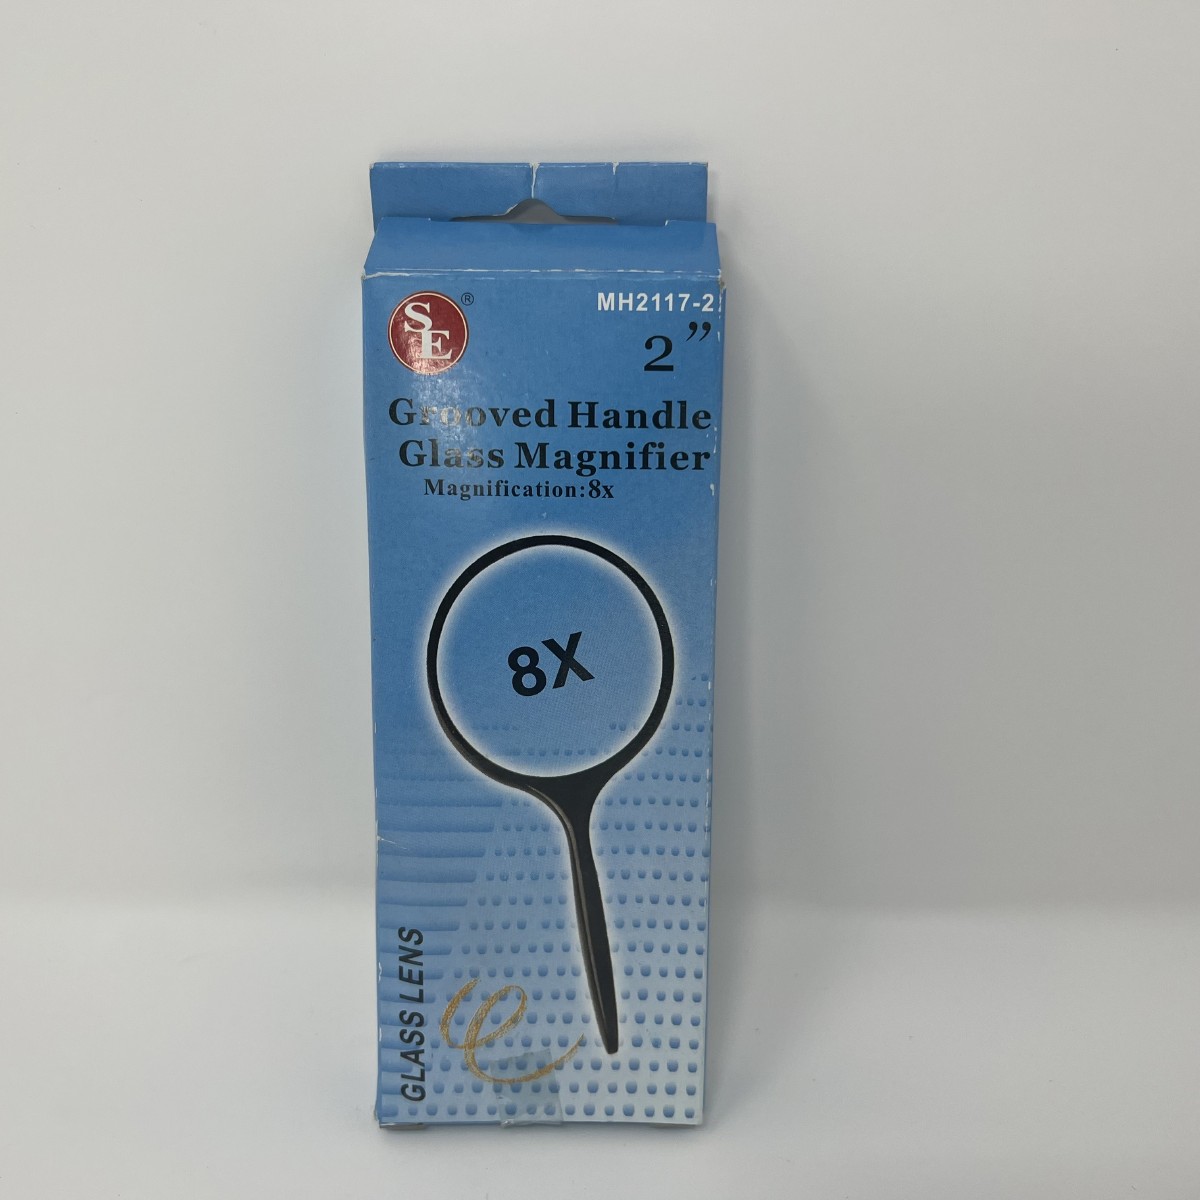 Larger picture of our Portable Reading Magnifier